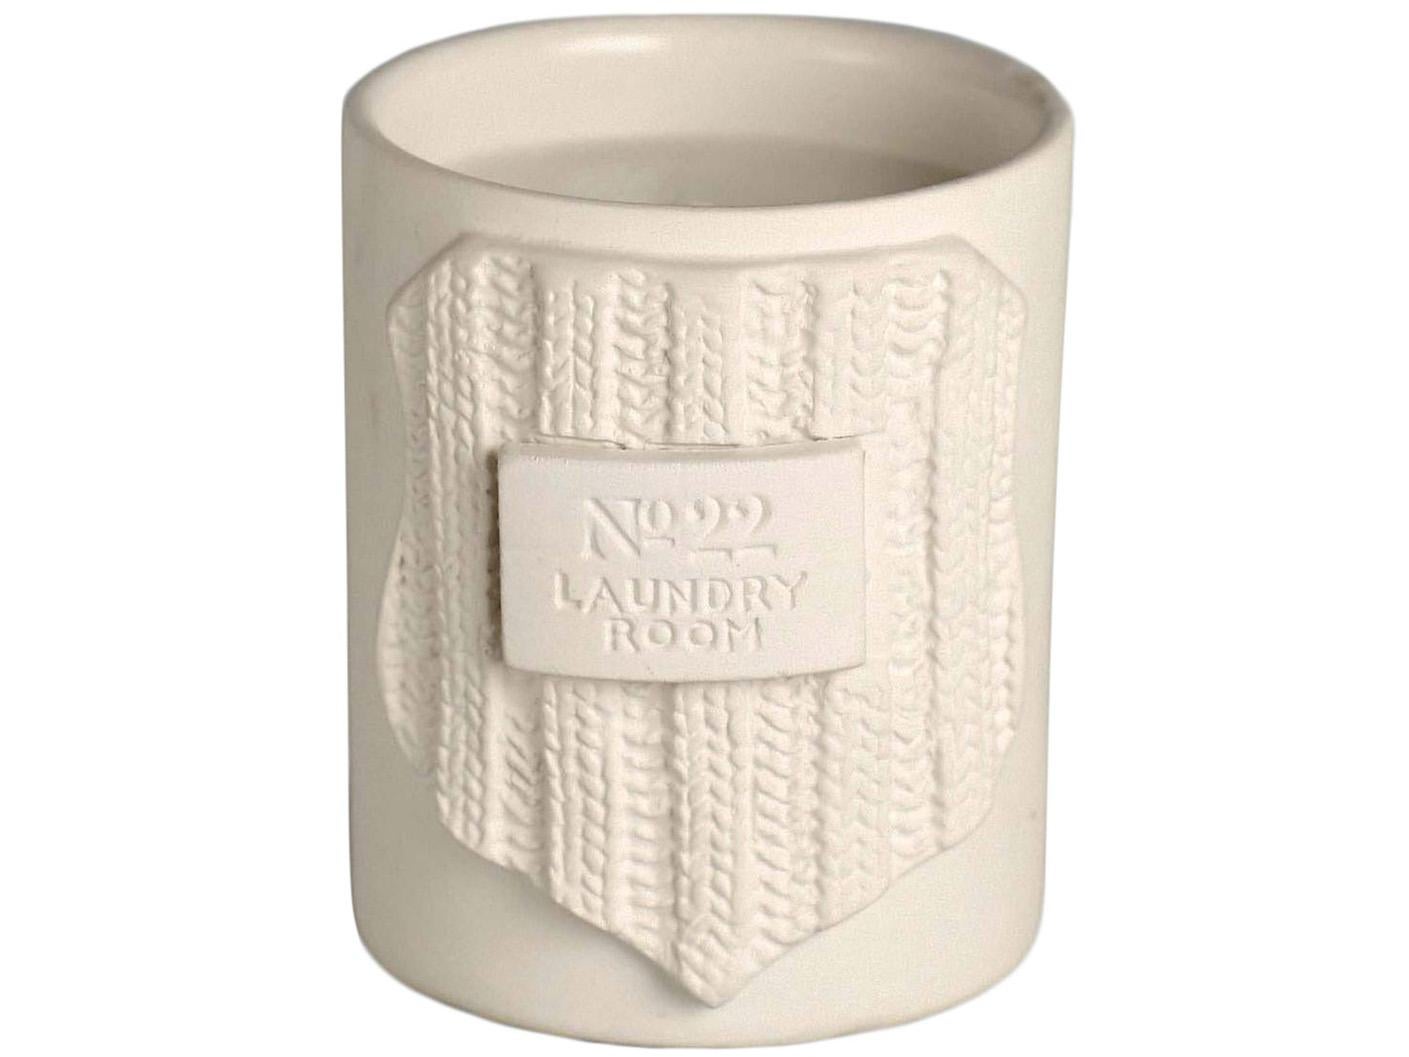 No 22, Laundry Room Scented Candle, £40, Net-a-Porter